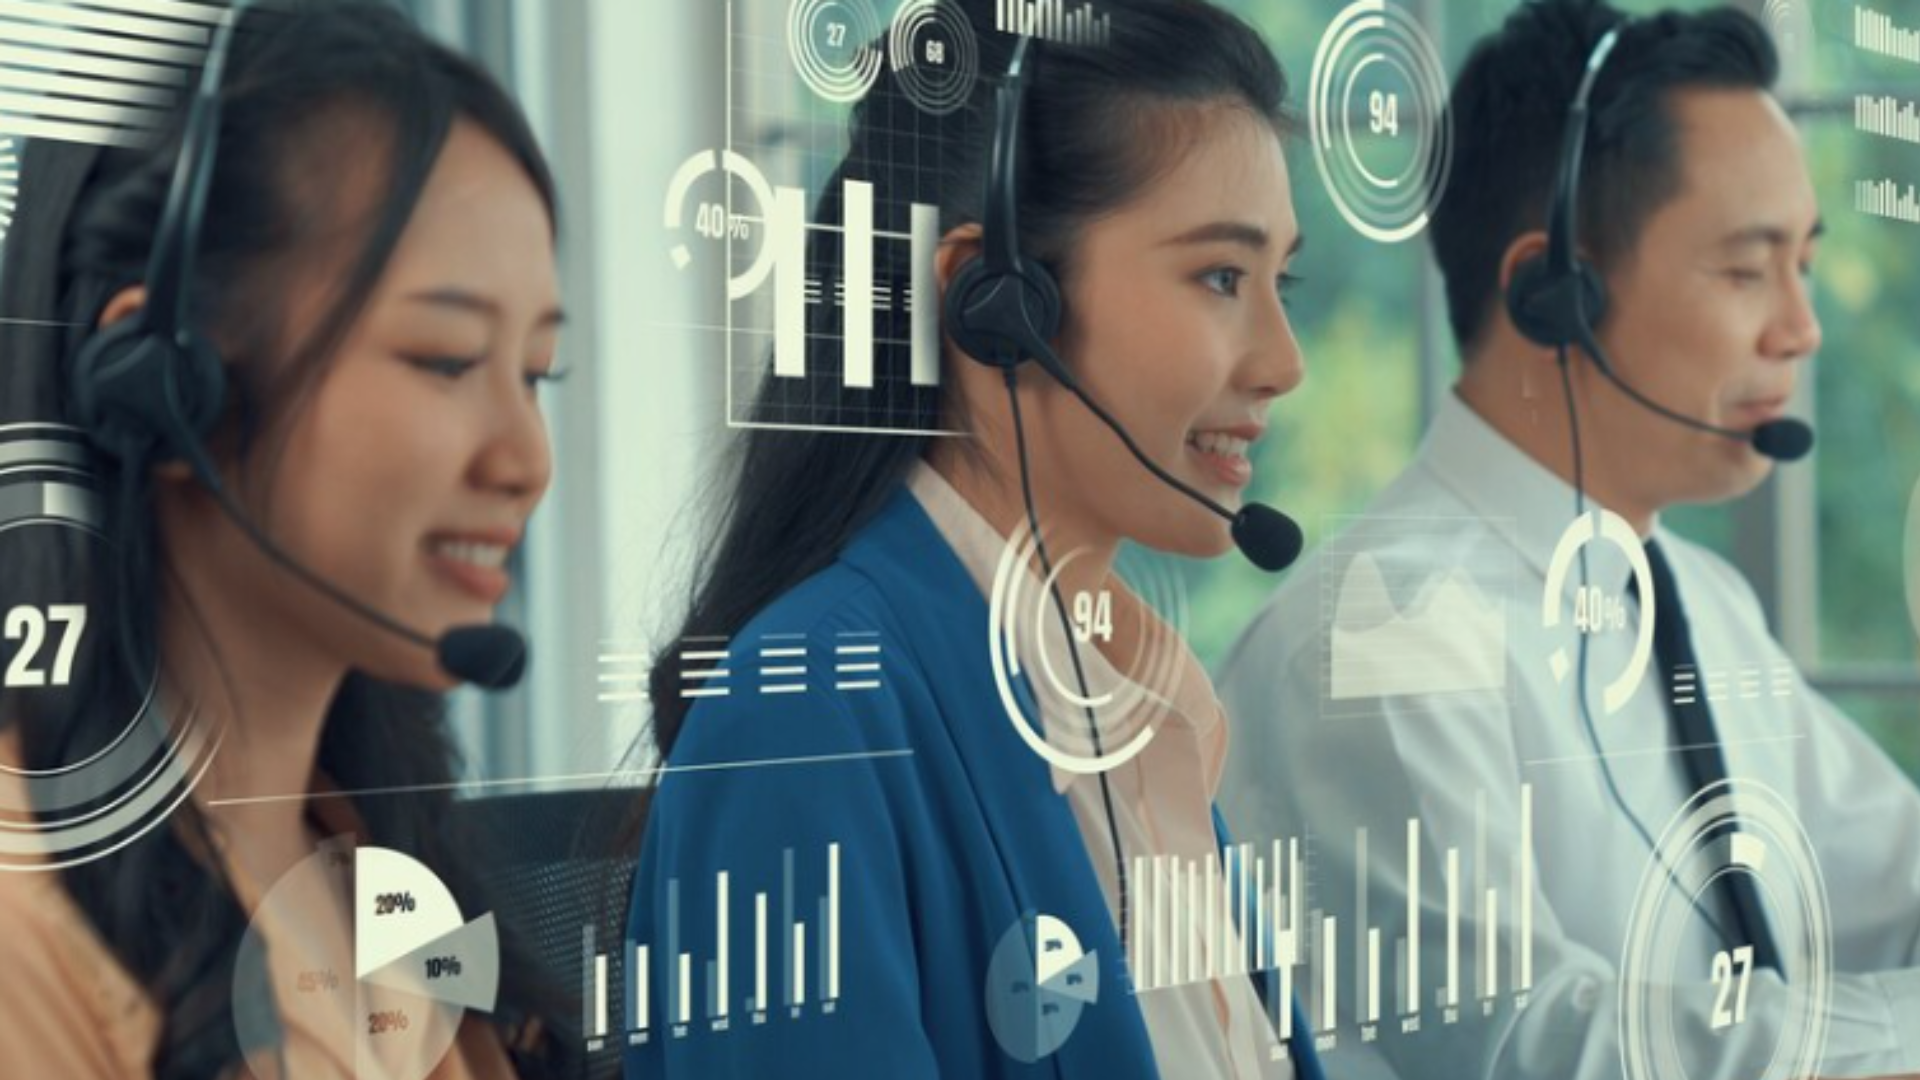 Image of The Central Role of BPO Digital Contact Centers in the Modern Customer Experience